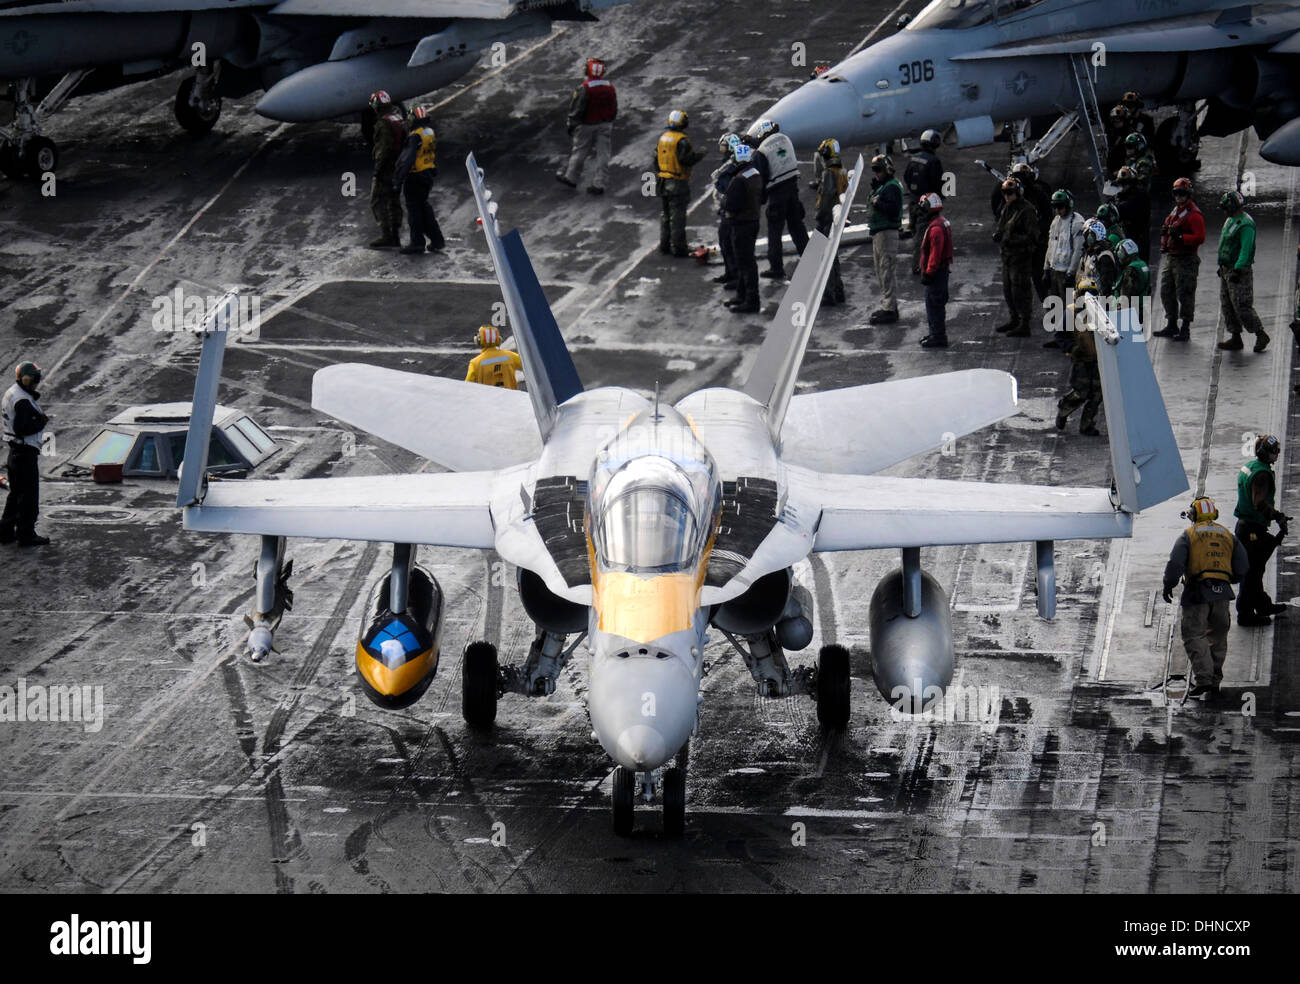 A U.S. Navy F/A-18C Hornet aircraft taxis on the flight deck of the aircraft carrier USS Nimitz during flight operations November 6, 2013 in the Mediterranean Sea. Stock Photo